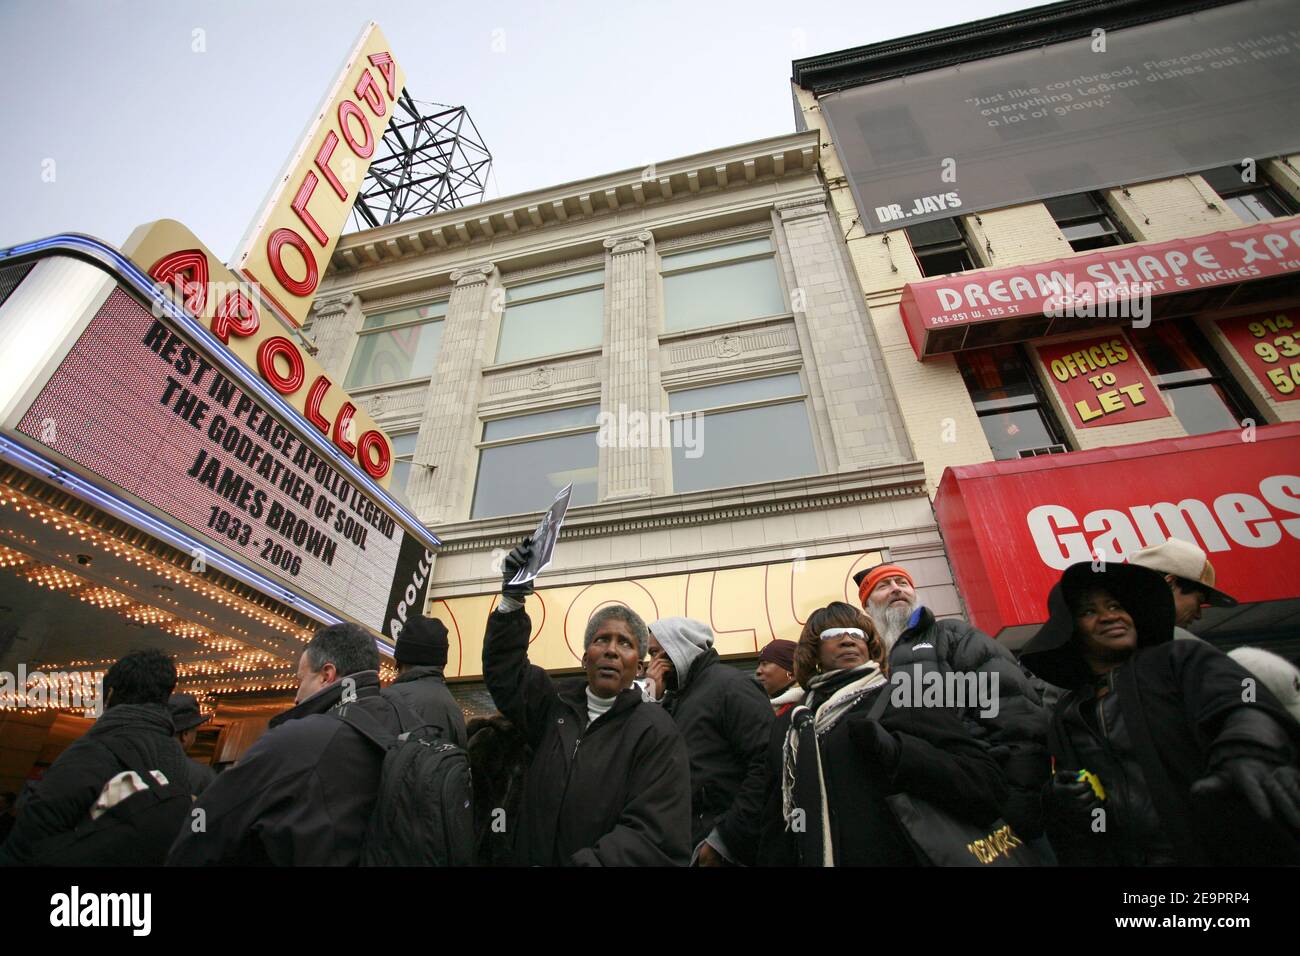 Thousands of people line up outside the Apollo Theater to view James Brown's casket in New York 28 December 2006. Brown, 73, who died of congestive heart failure on Christmas Day, received a send-off befitting the music royalty, his white casket pulled by a horse-drawn carriage. Photo by Gerald Holubowicz/ABACAPRESS.COM Stock Photo